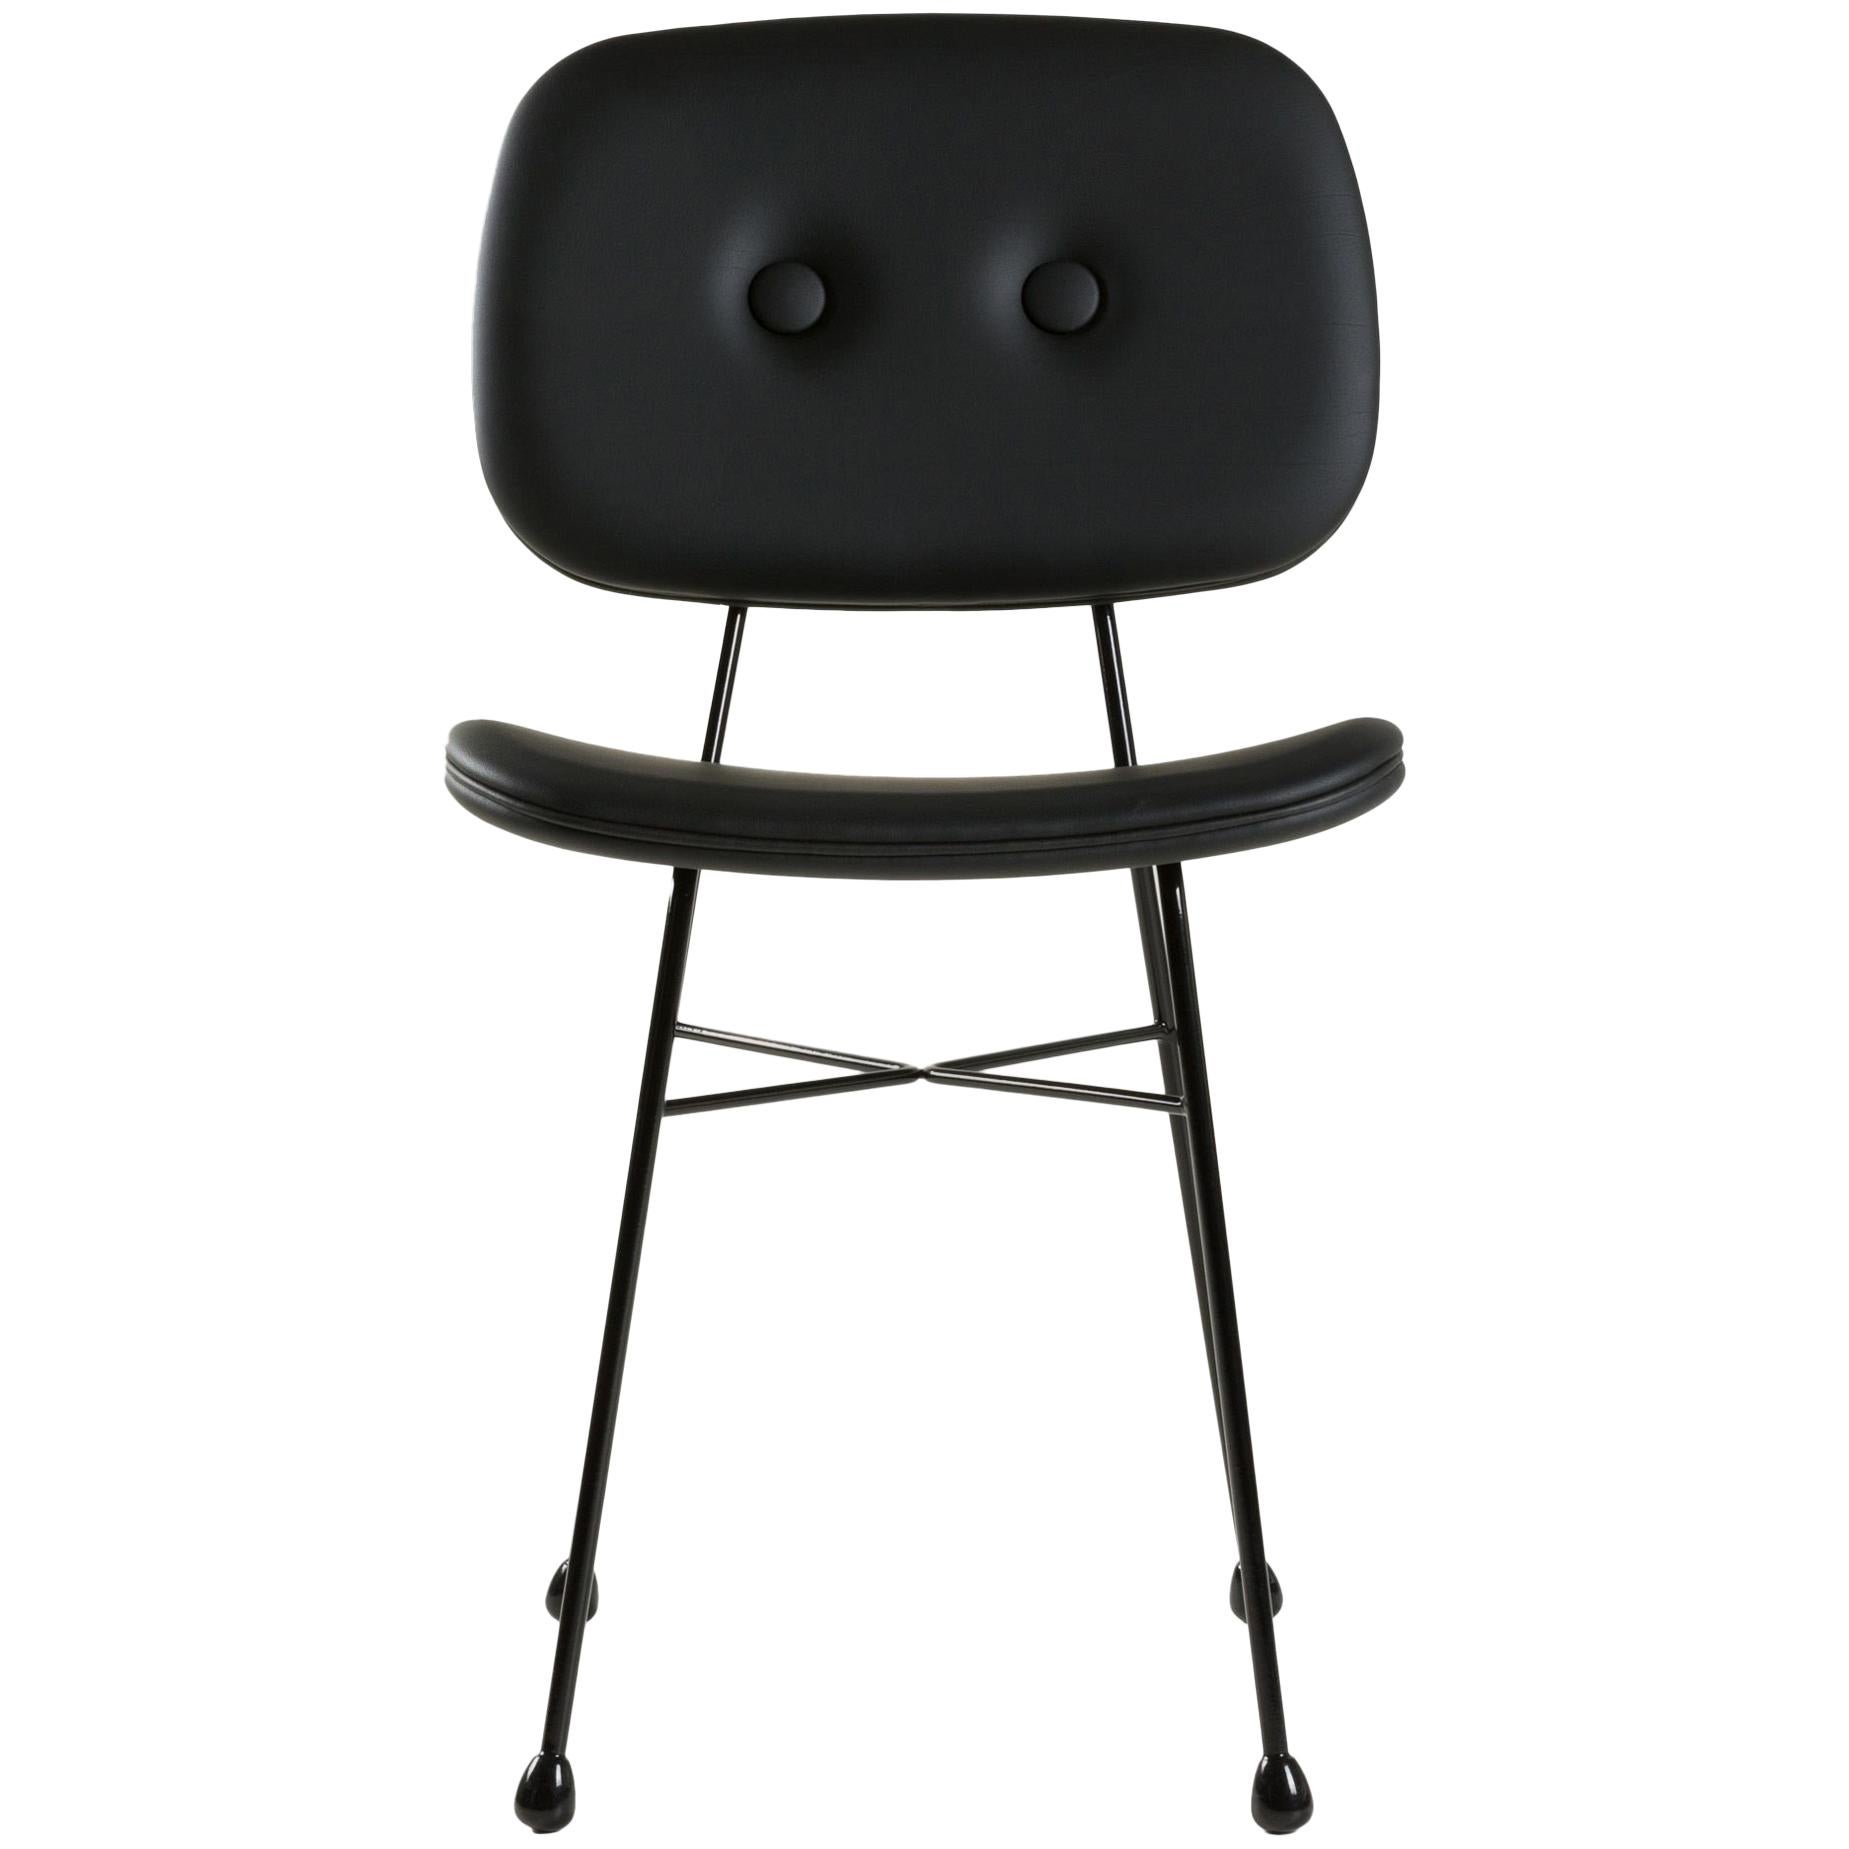 Moooi "The Golden Chair" in Matt Black Synthetic Leather and Black Steel Frame im Angebot